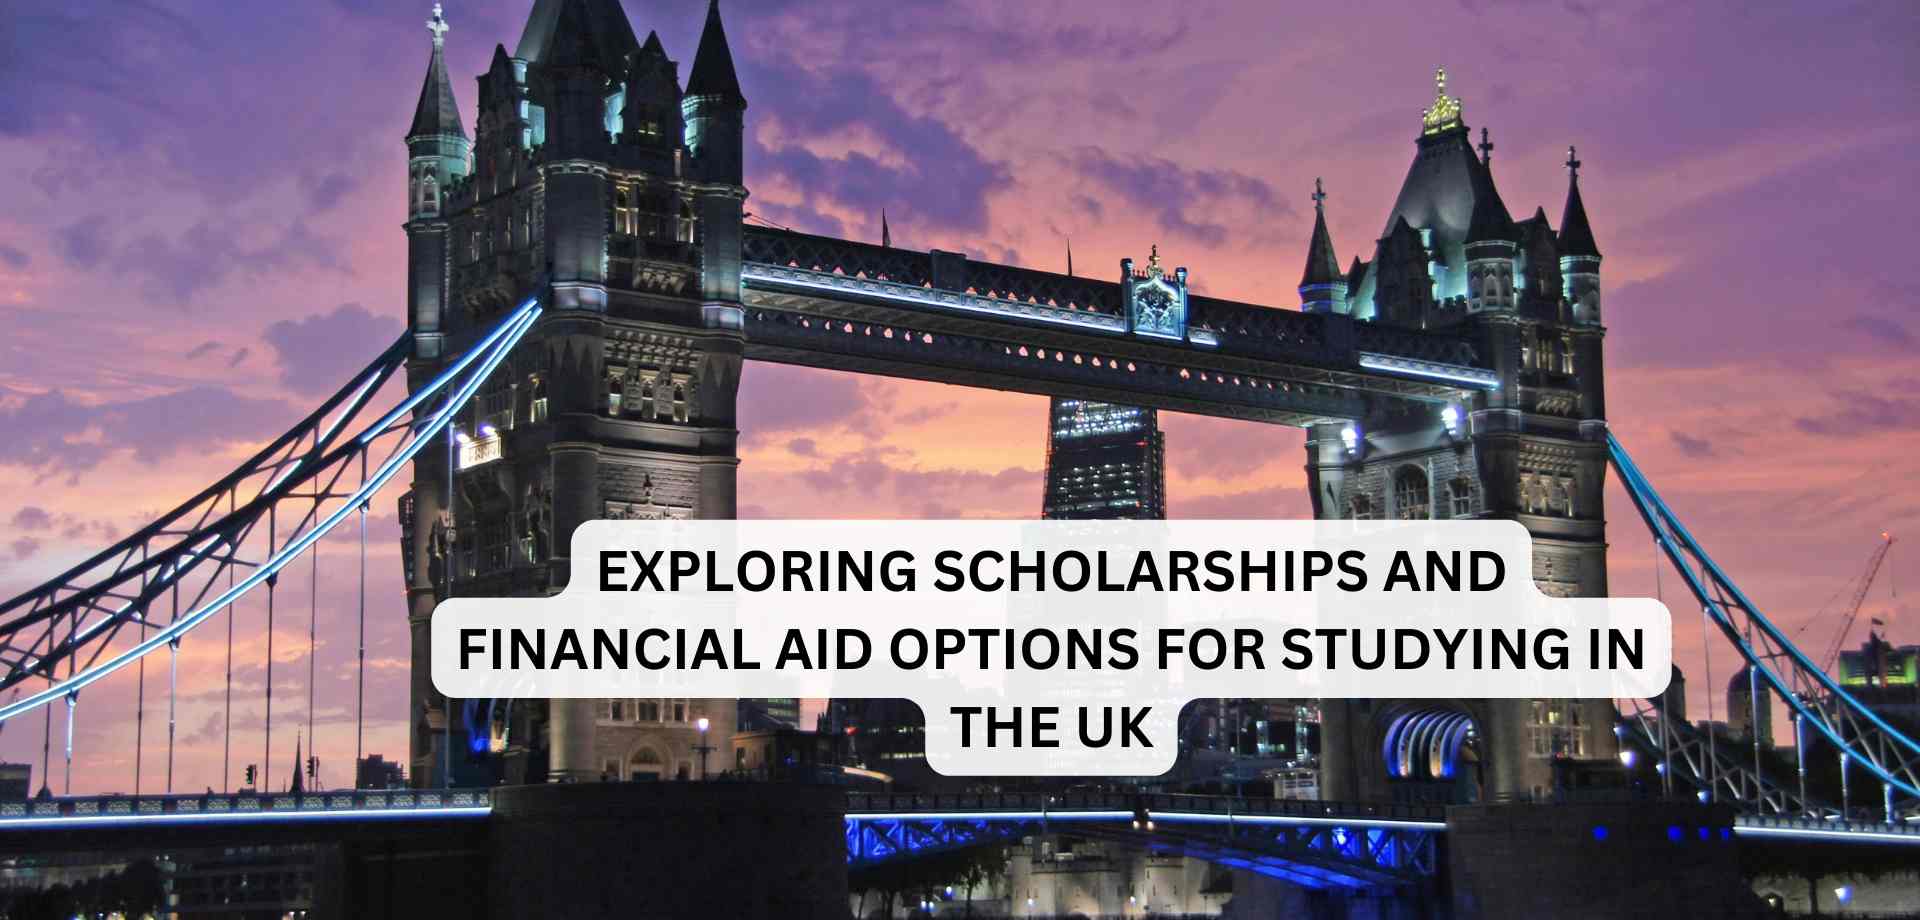 Exploring Scholarships and Financial Aid Options for Studying in the UK